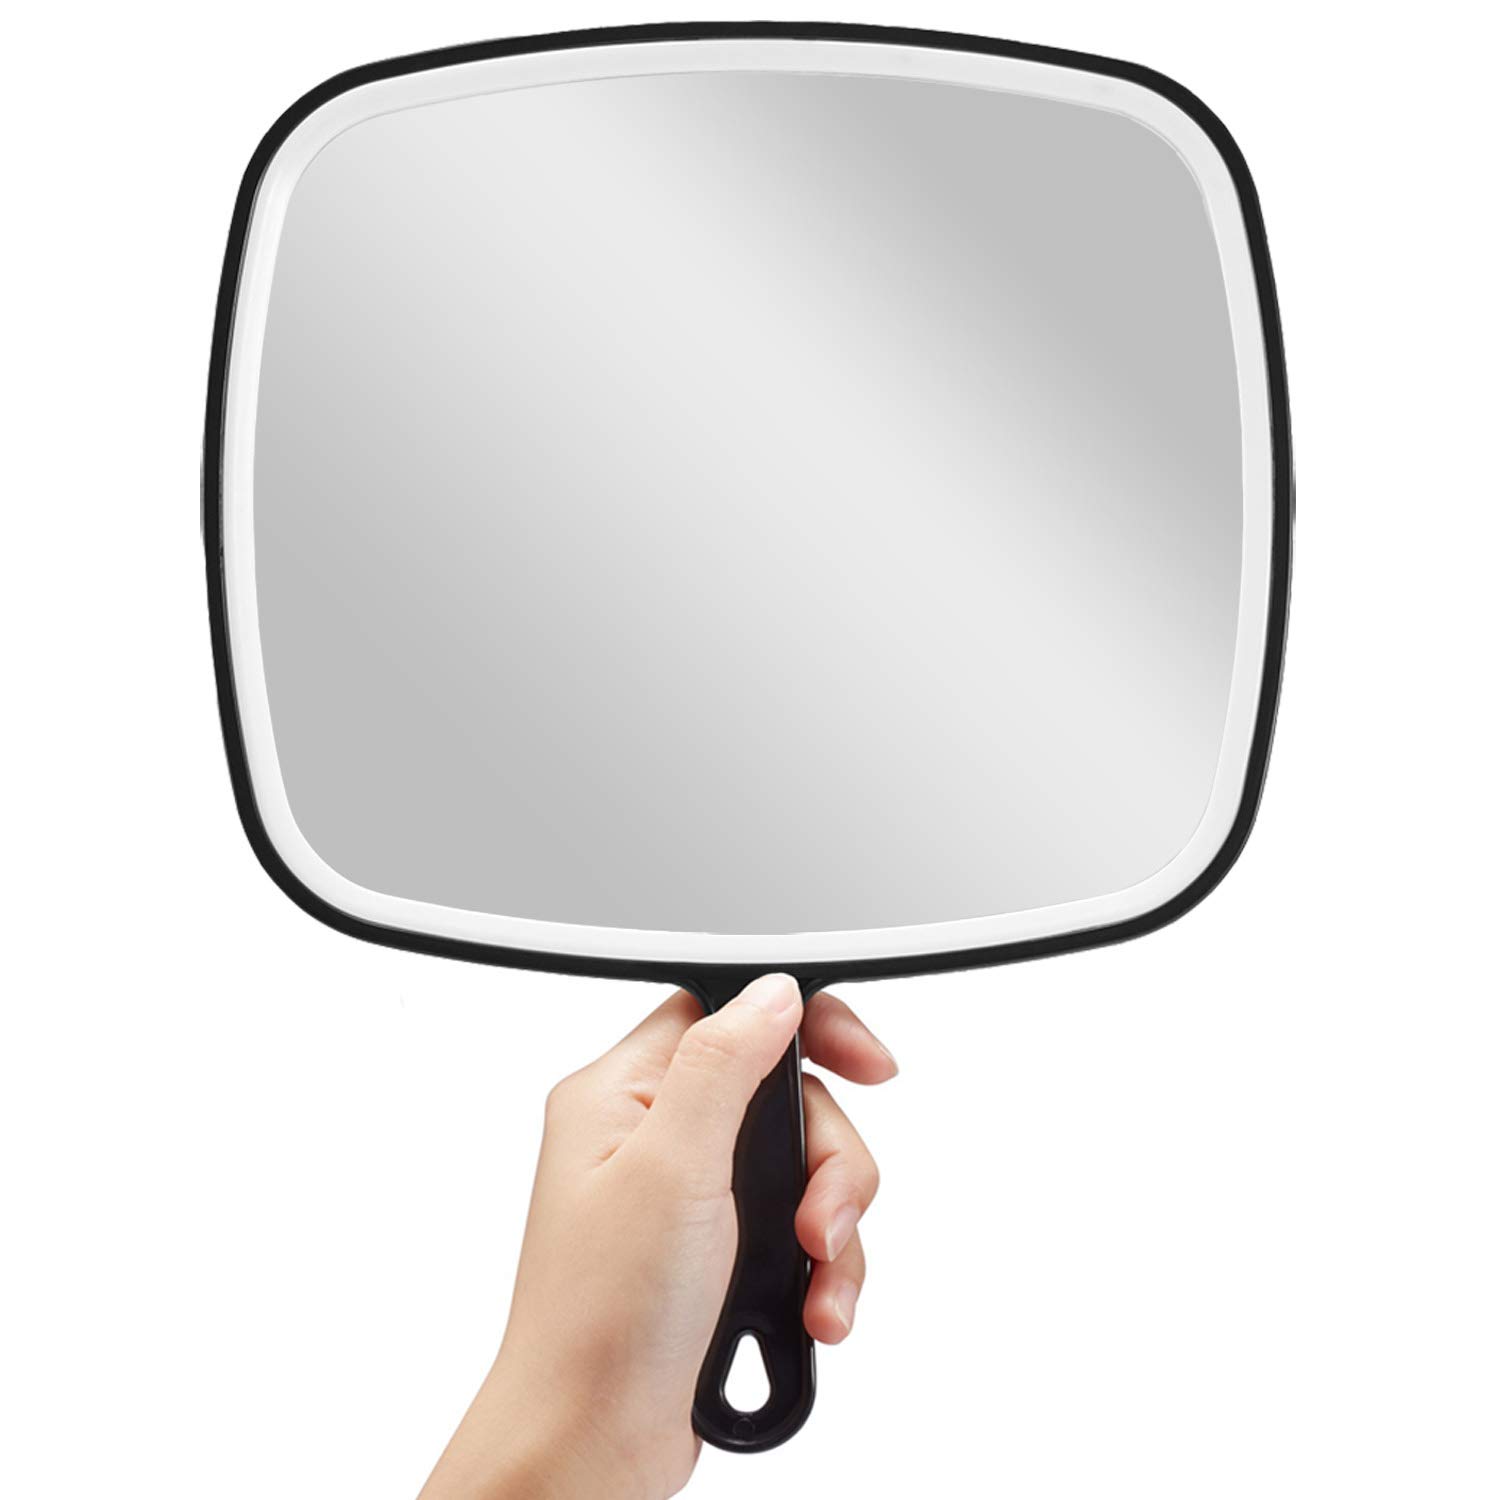 OMIRO-Hand-Mirror-Extra-Large-Black-Handheld-Mirror-with-Handle-9-inch-W-x-12.4-inch-L.jpg